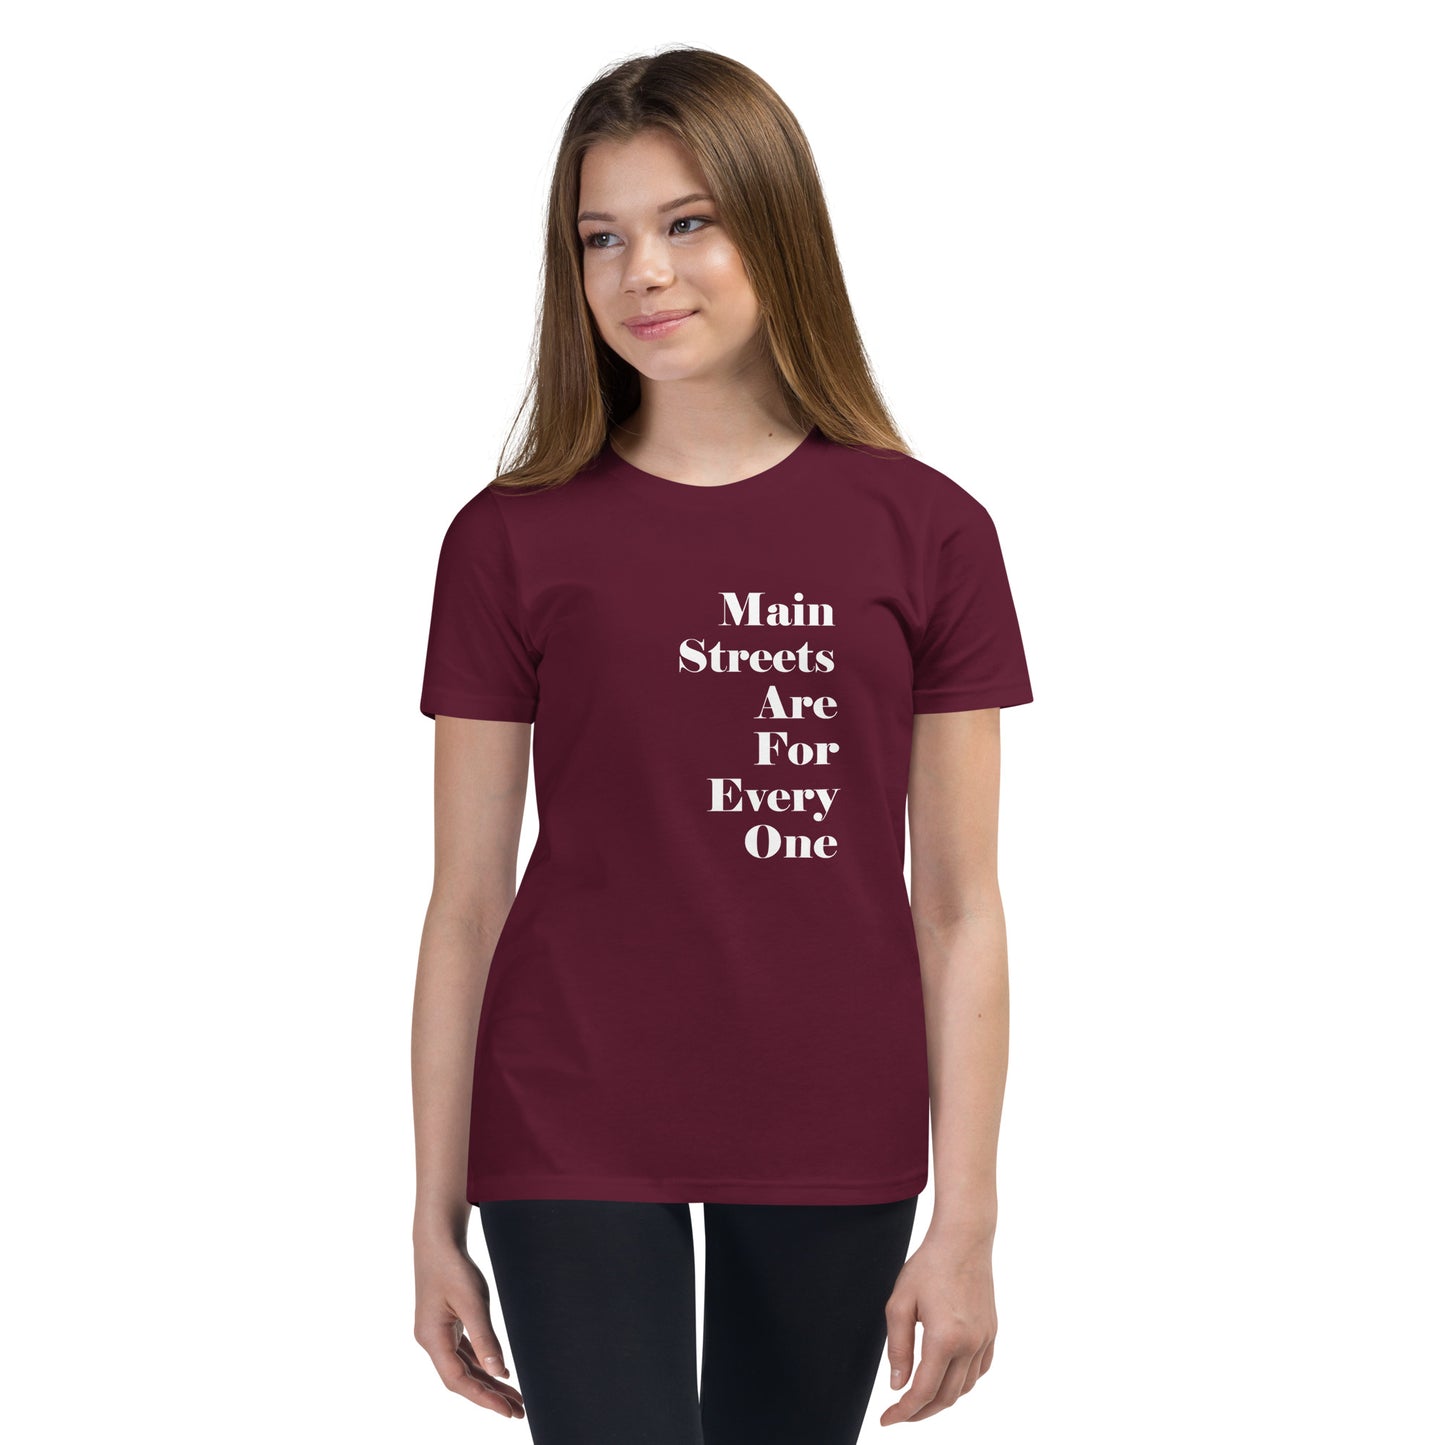 Main Streets Are For Everyone Youth Short Sleeve T-Shirt